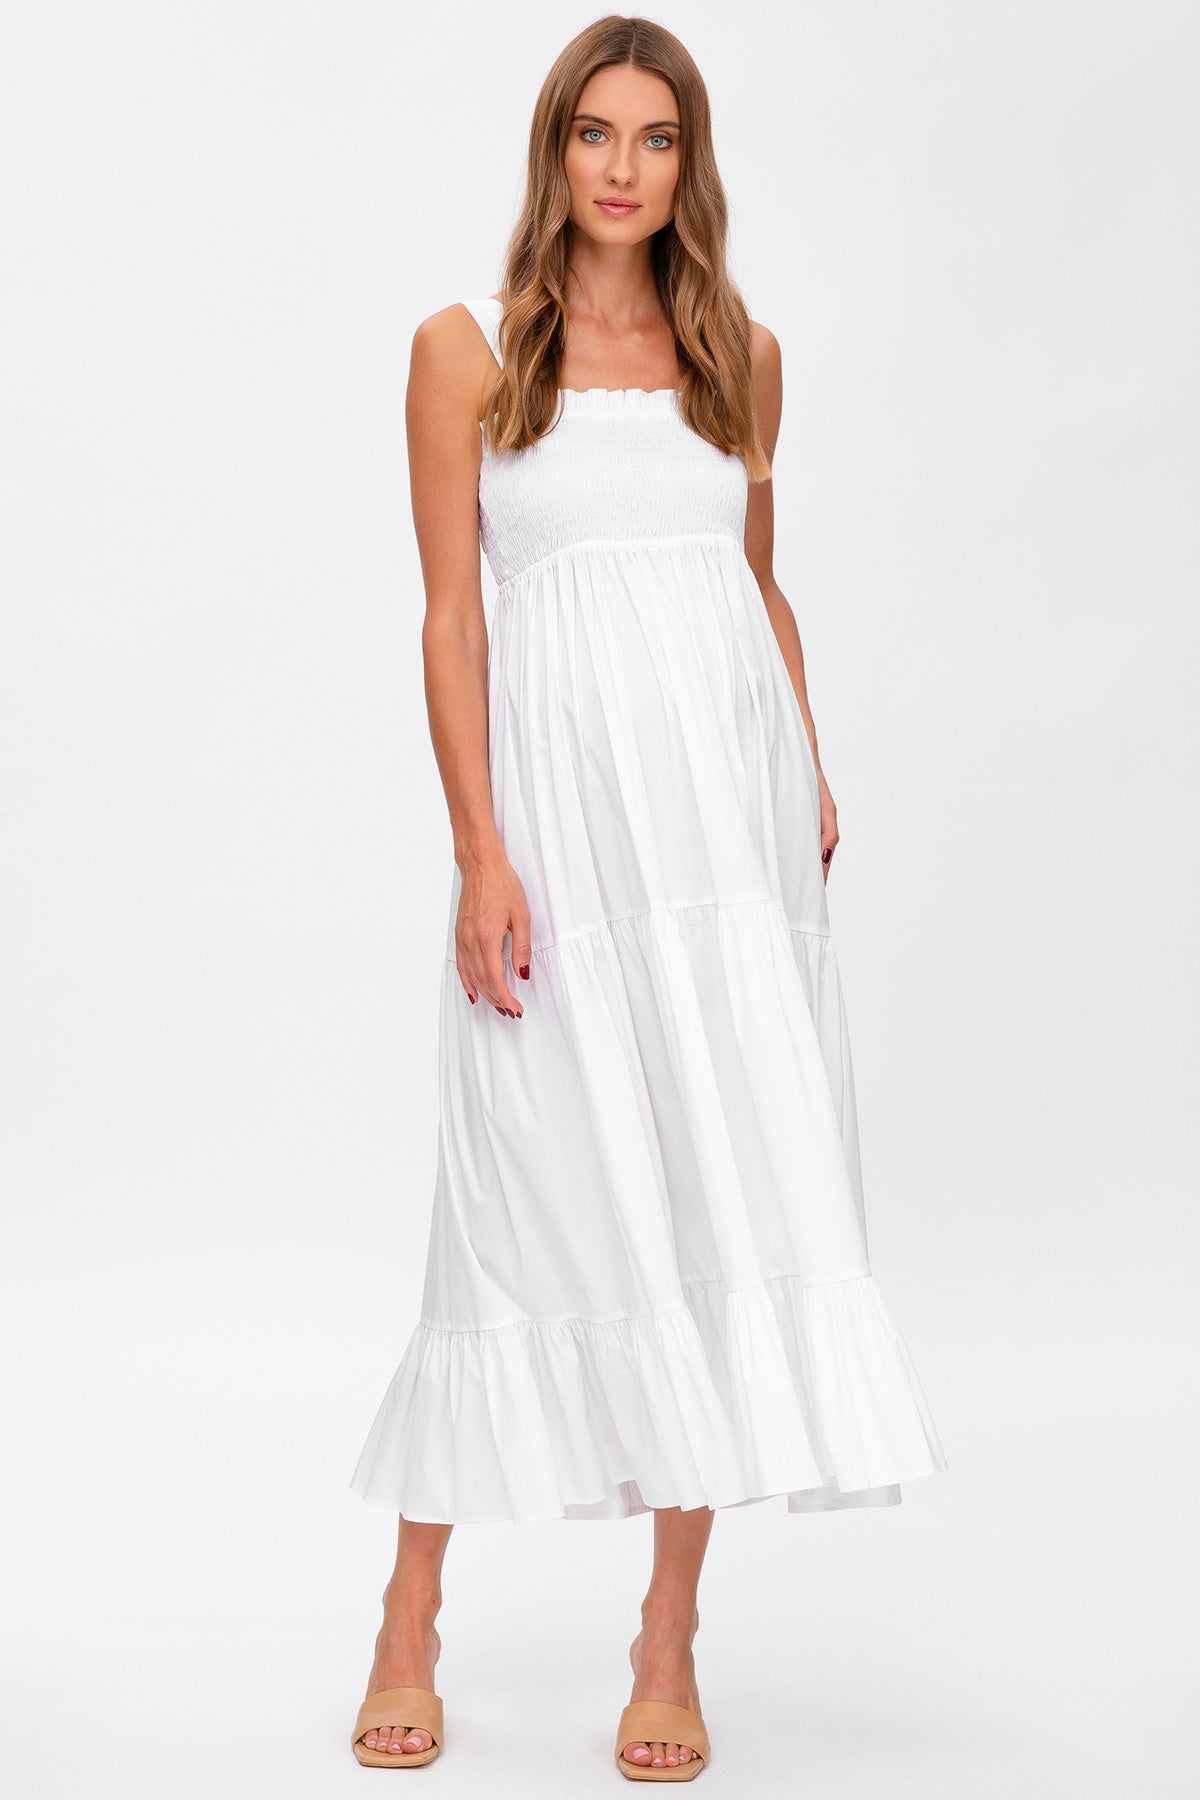 HOLLY | Long Maternity Dress in White